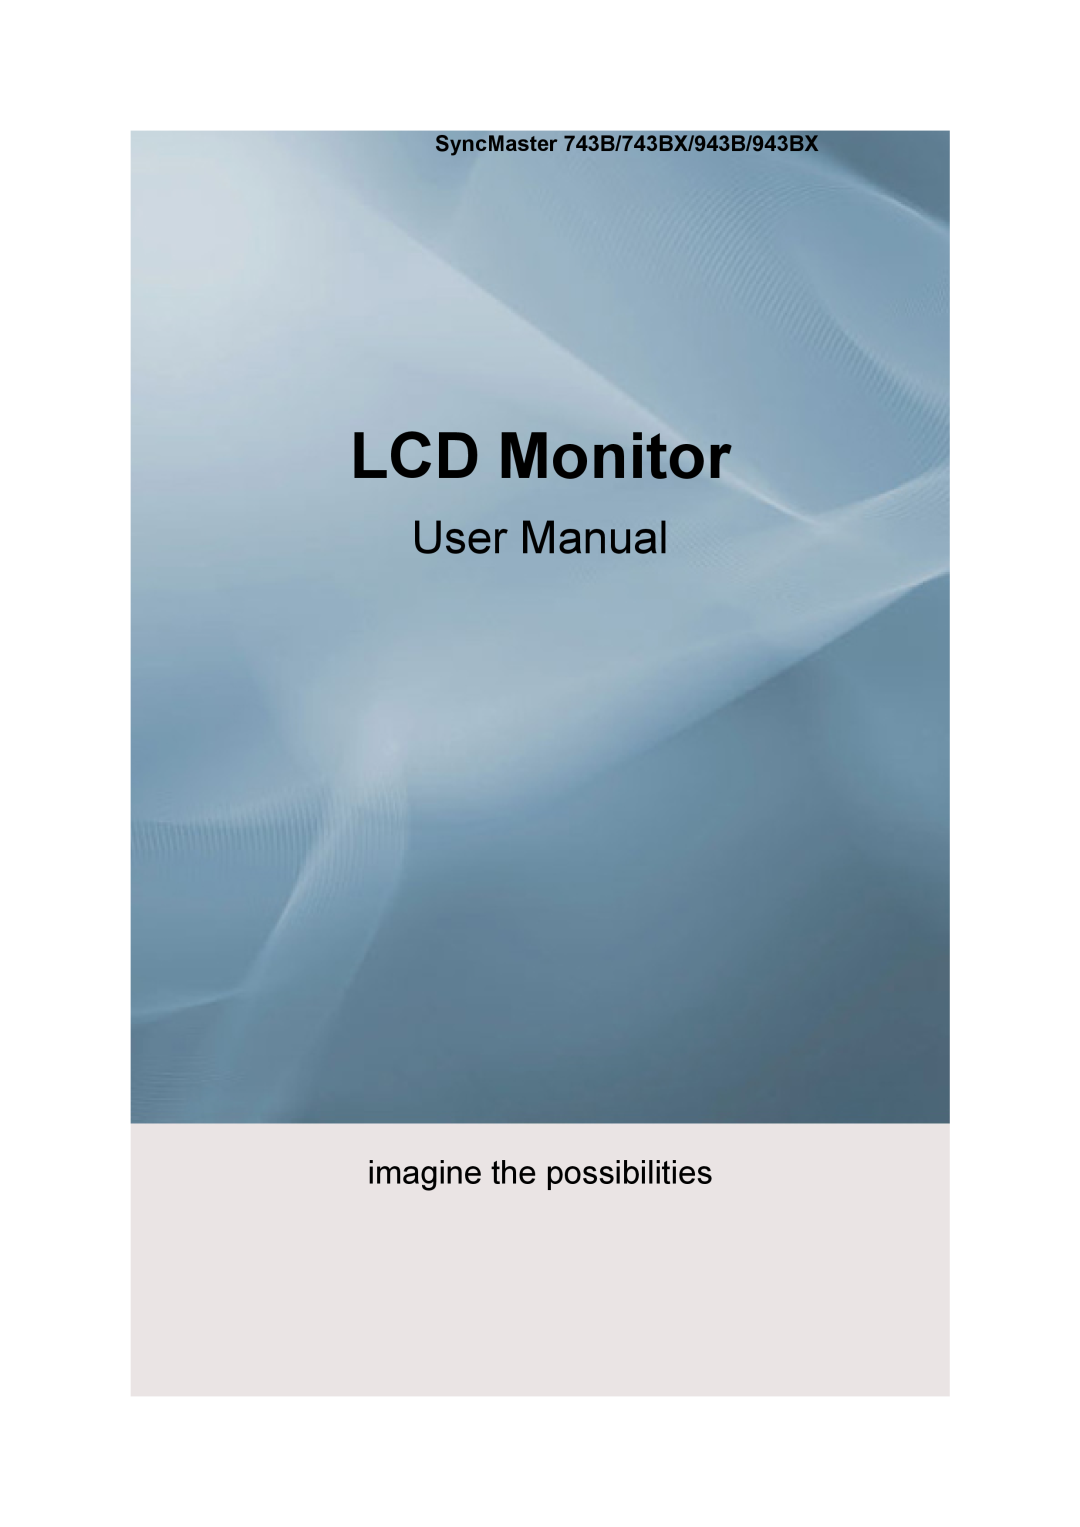 Samsung user manual SyncMaster 743B/743BX/943B/943BX, LCD Monitor, User Manual, imagine the possibilities 